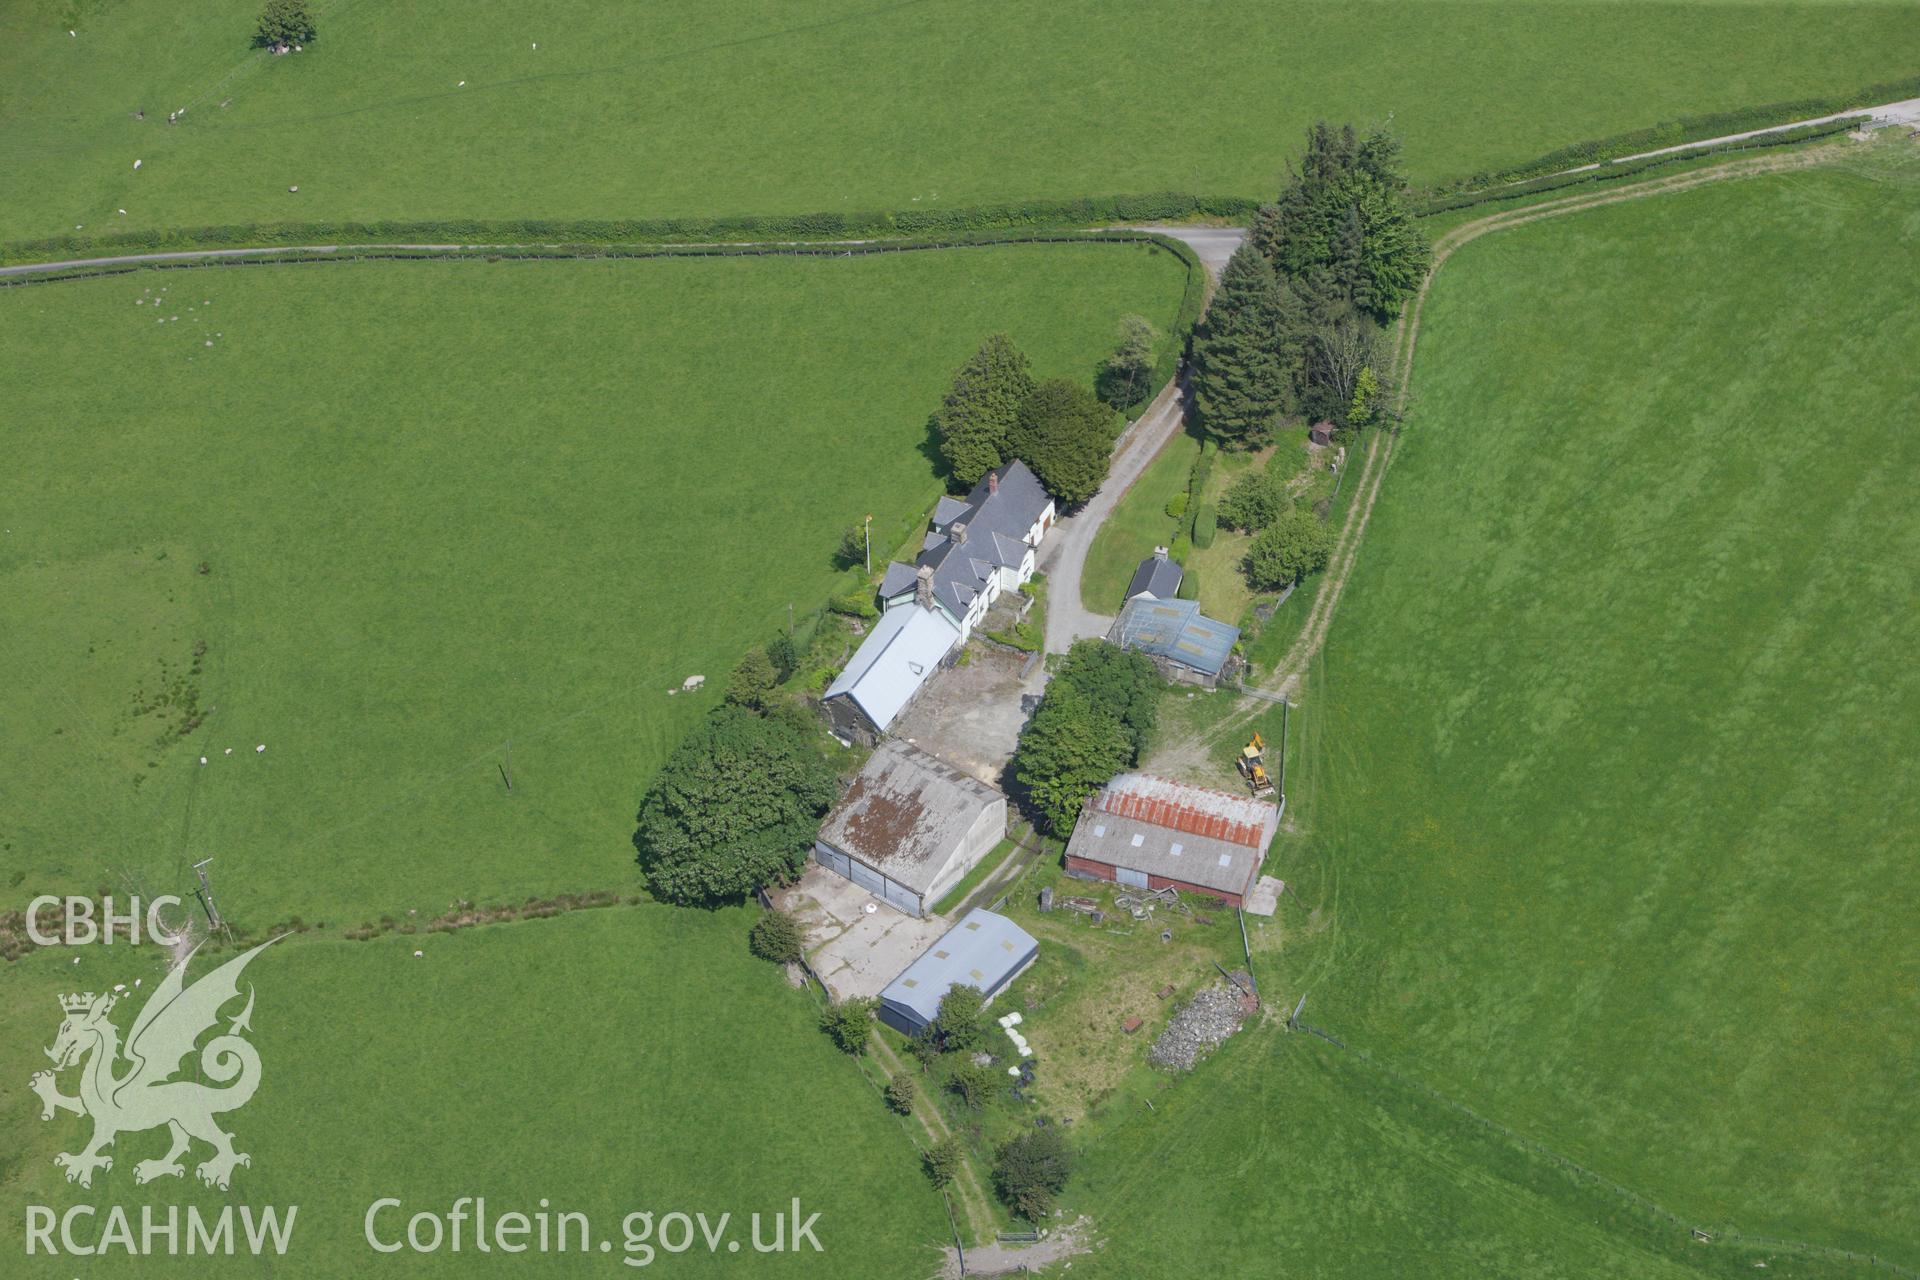 RCAHMW colour oblique aerial photograph of Cefn Caer Roman Fort, Pennal. Taken on 02 June 2009 by Toby Driver